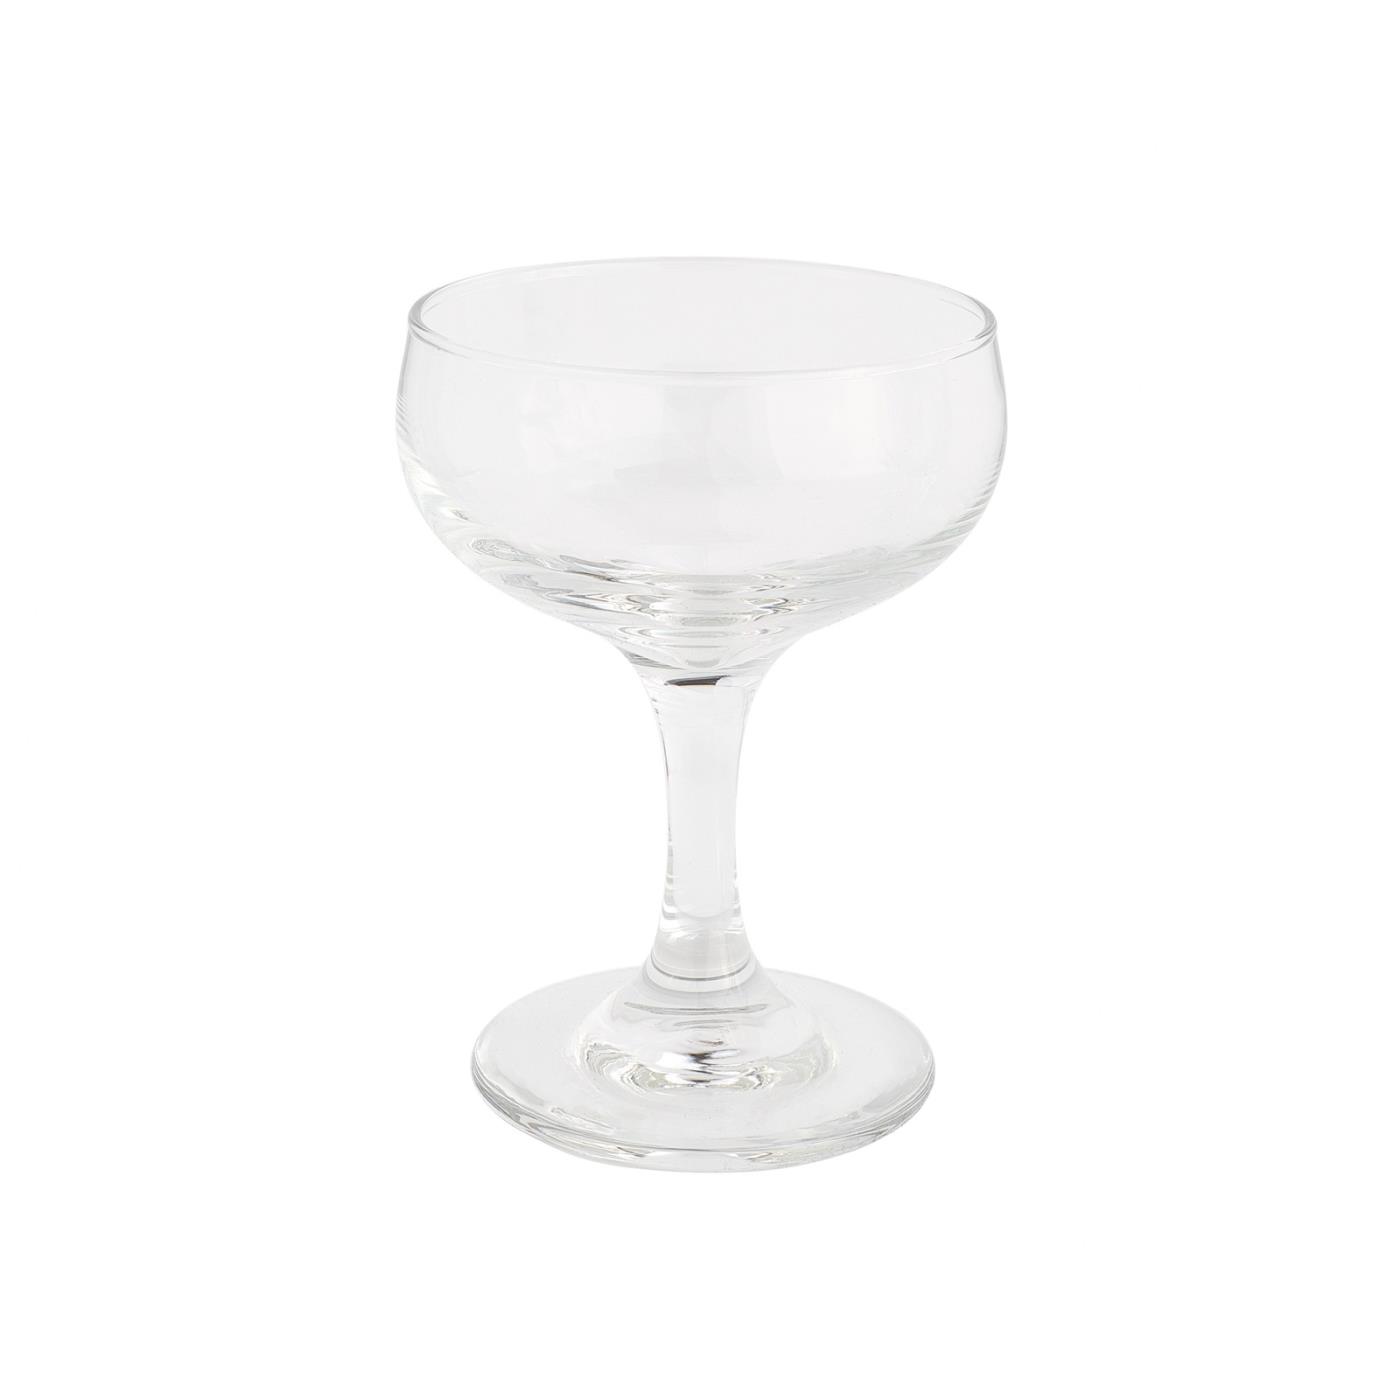 Standard Champagne Coupe Glass